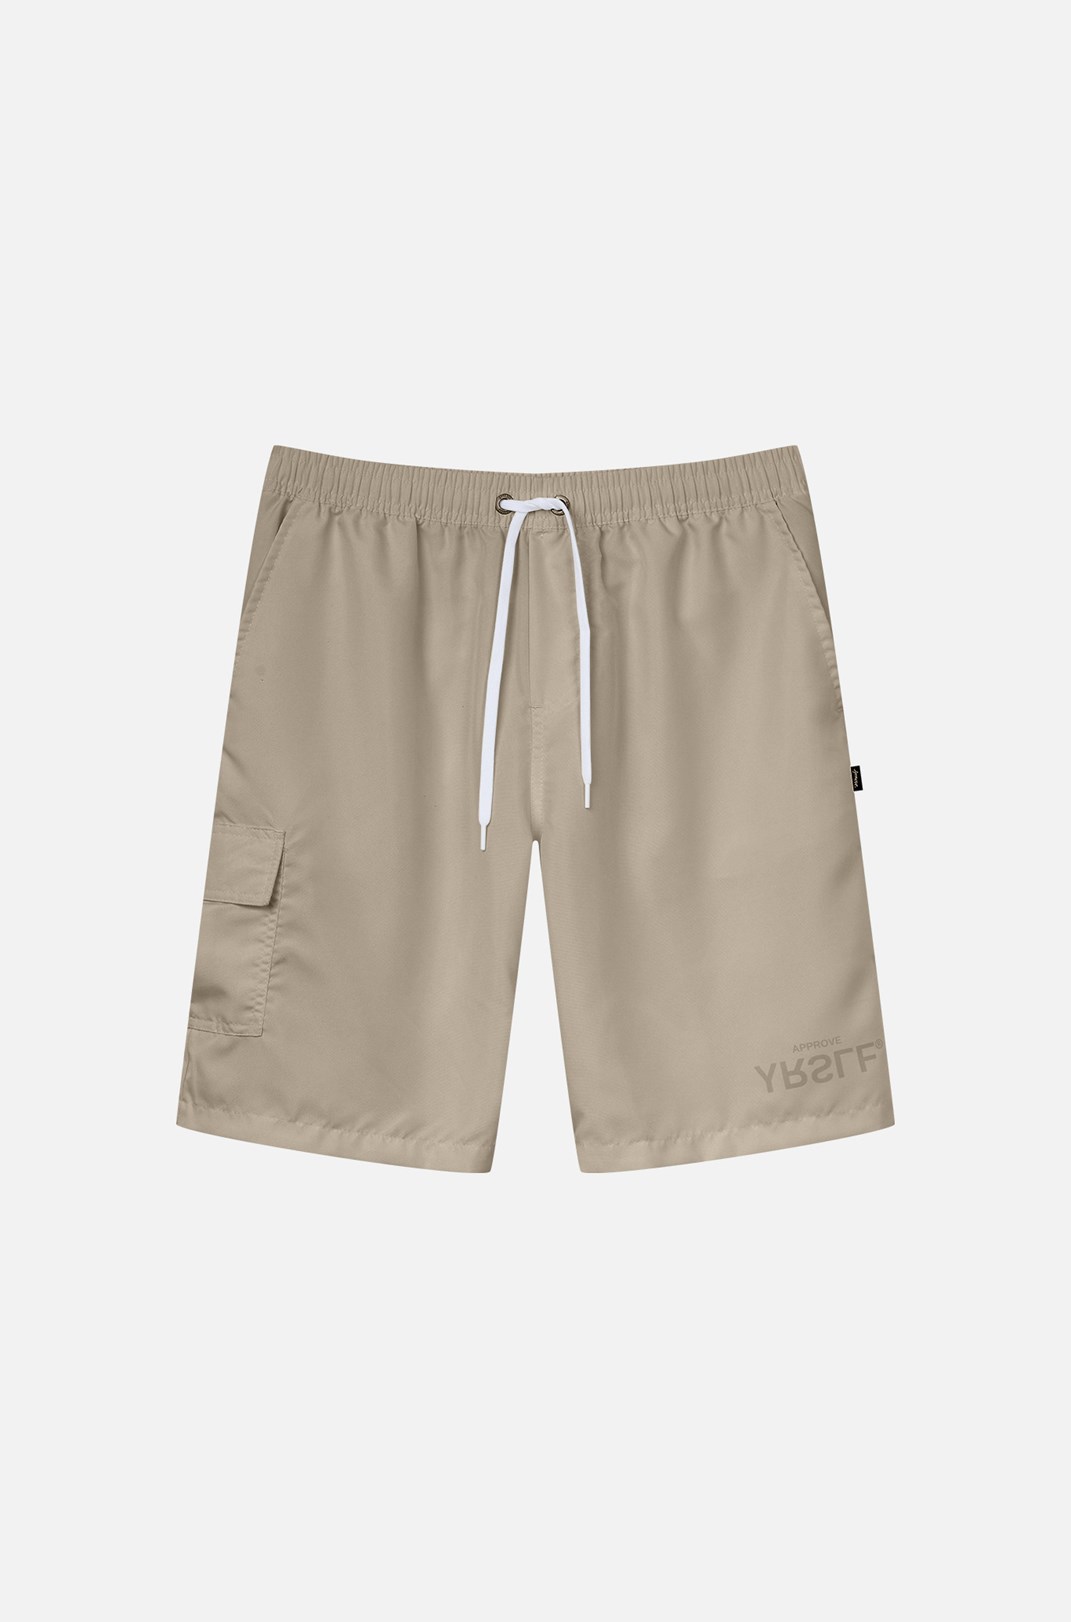 Shorts Cargo 9inches Approve Yrslf Inverse Collors Bege